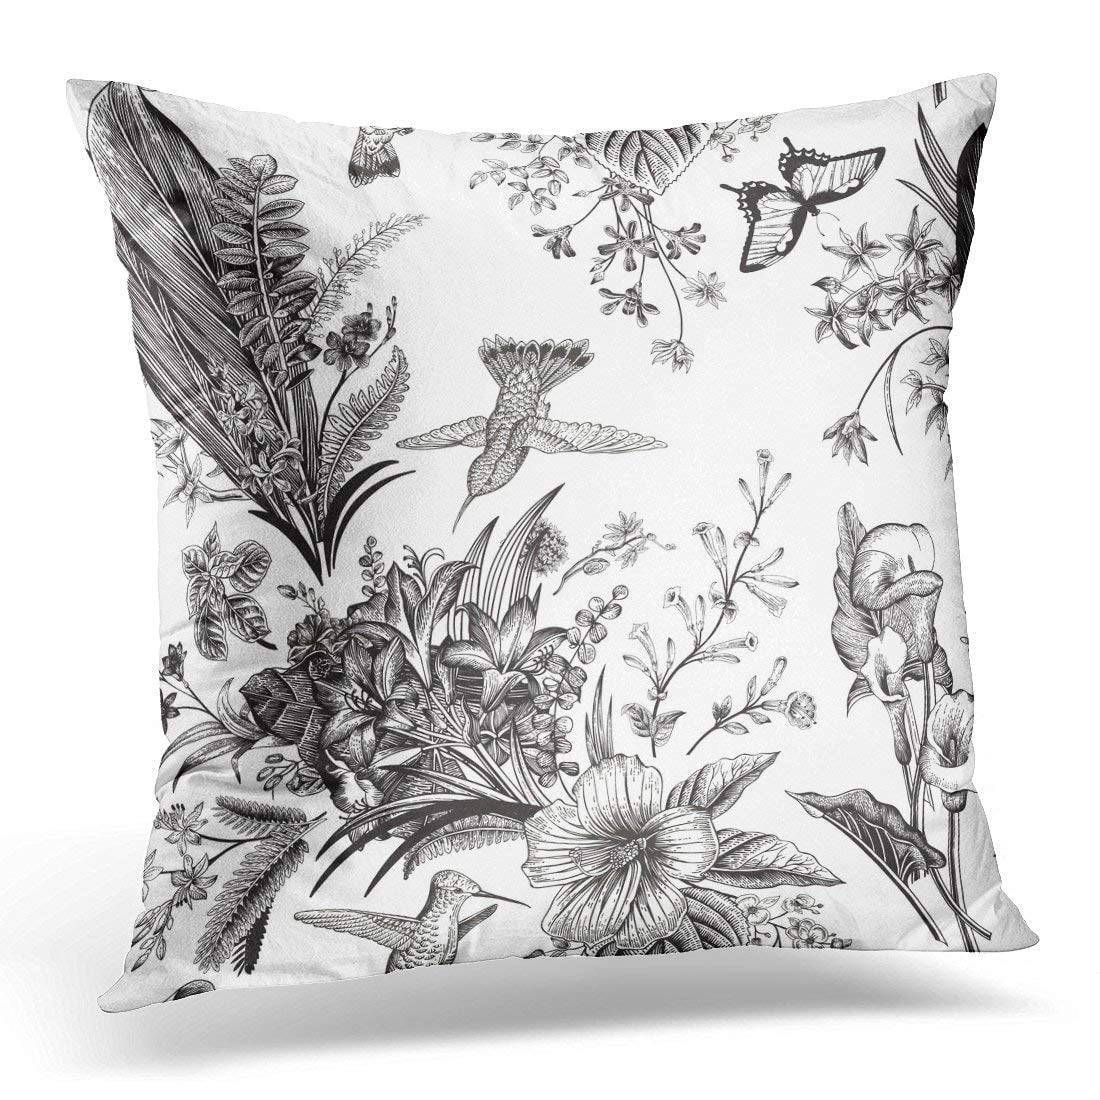 Rainforest Hand Painted Pillow Cover 16x16 Pillow Cover with Flowers Original Art Pillow Decorative Cushion